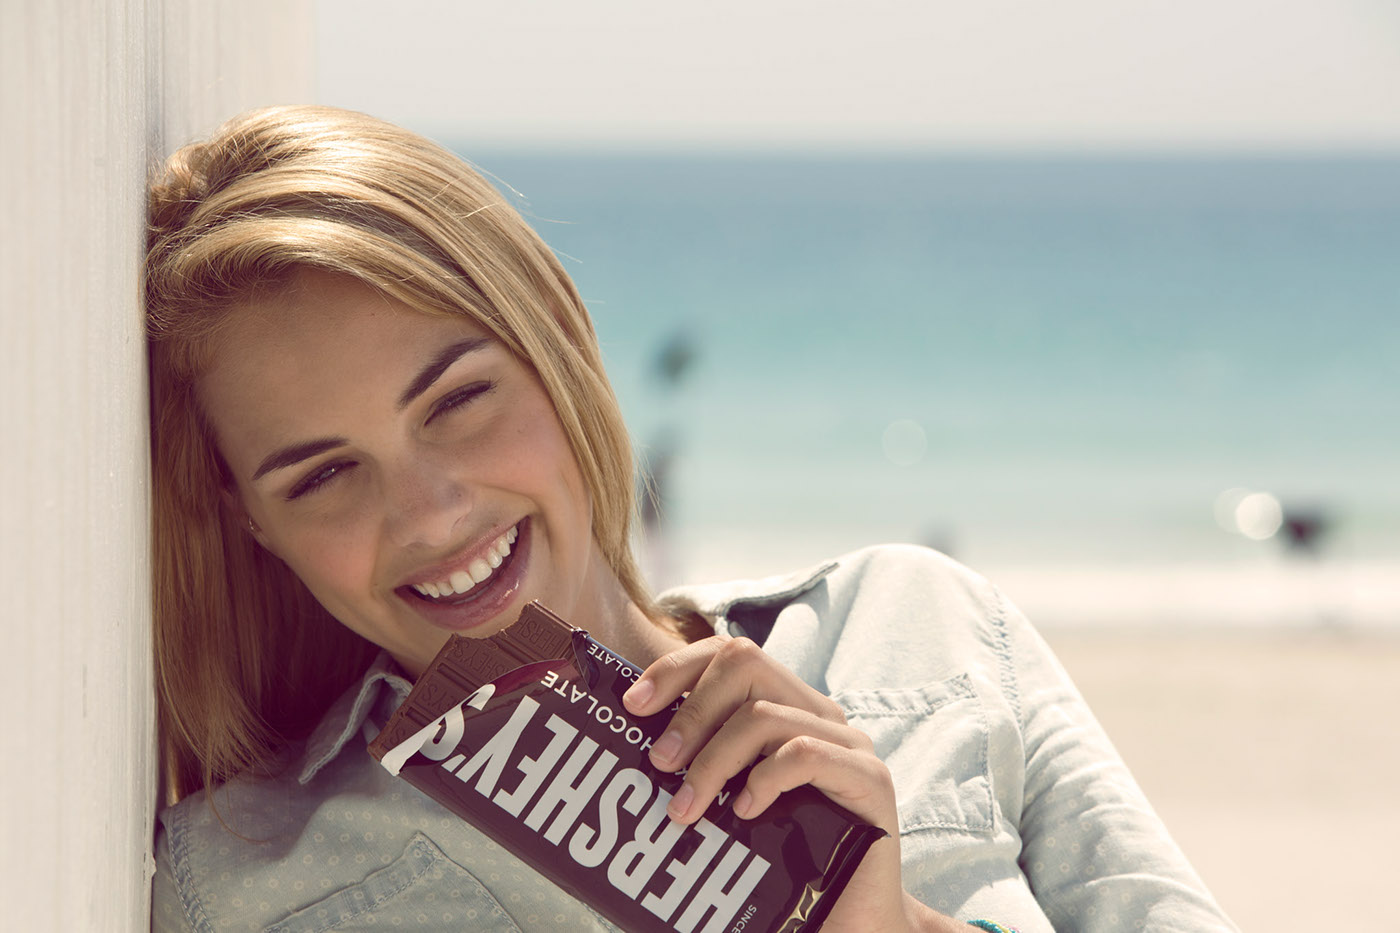 hershey's mauricio candela chocolate campaign lifestyle young and rubicam Y&R